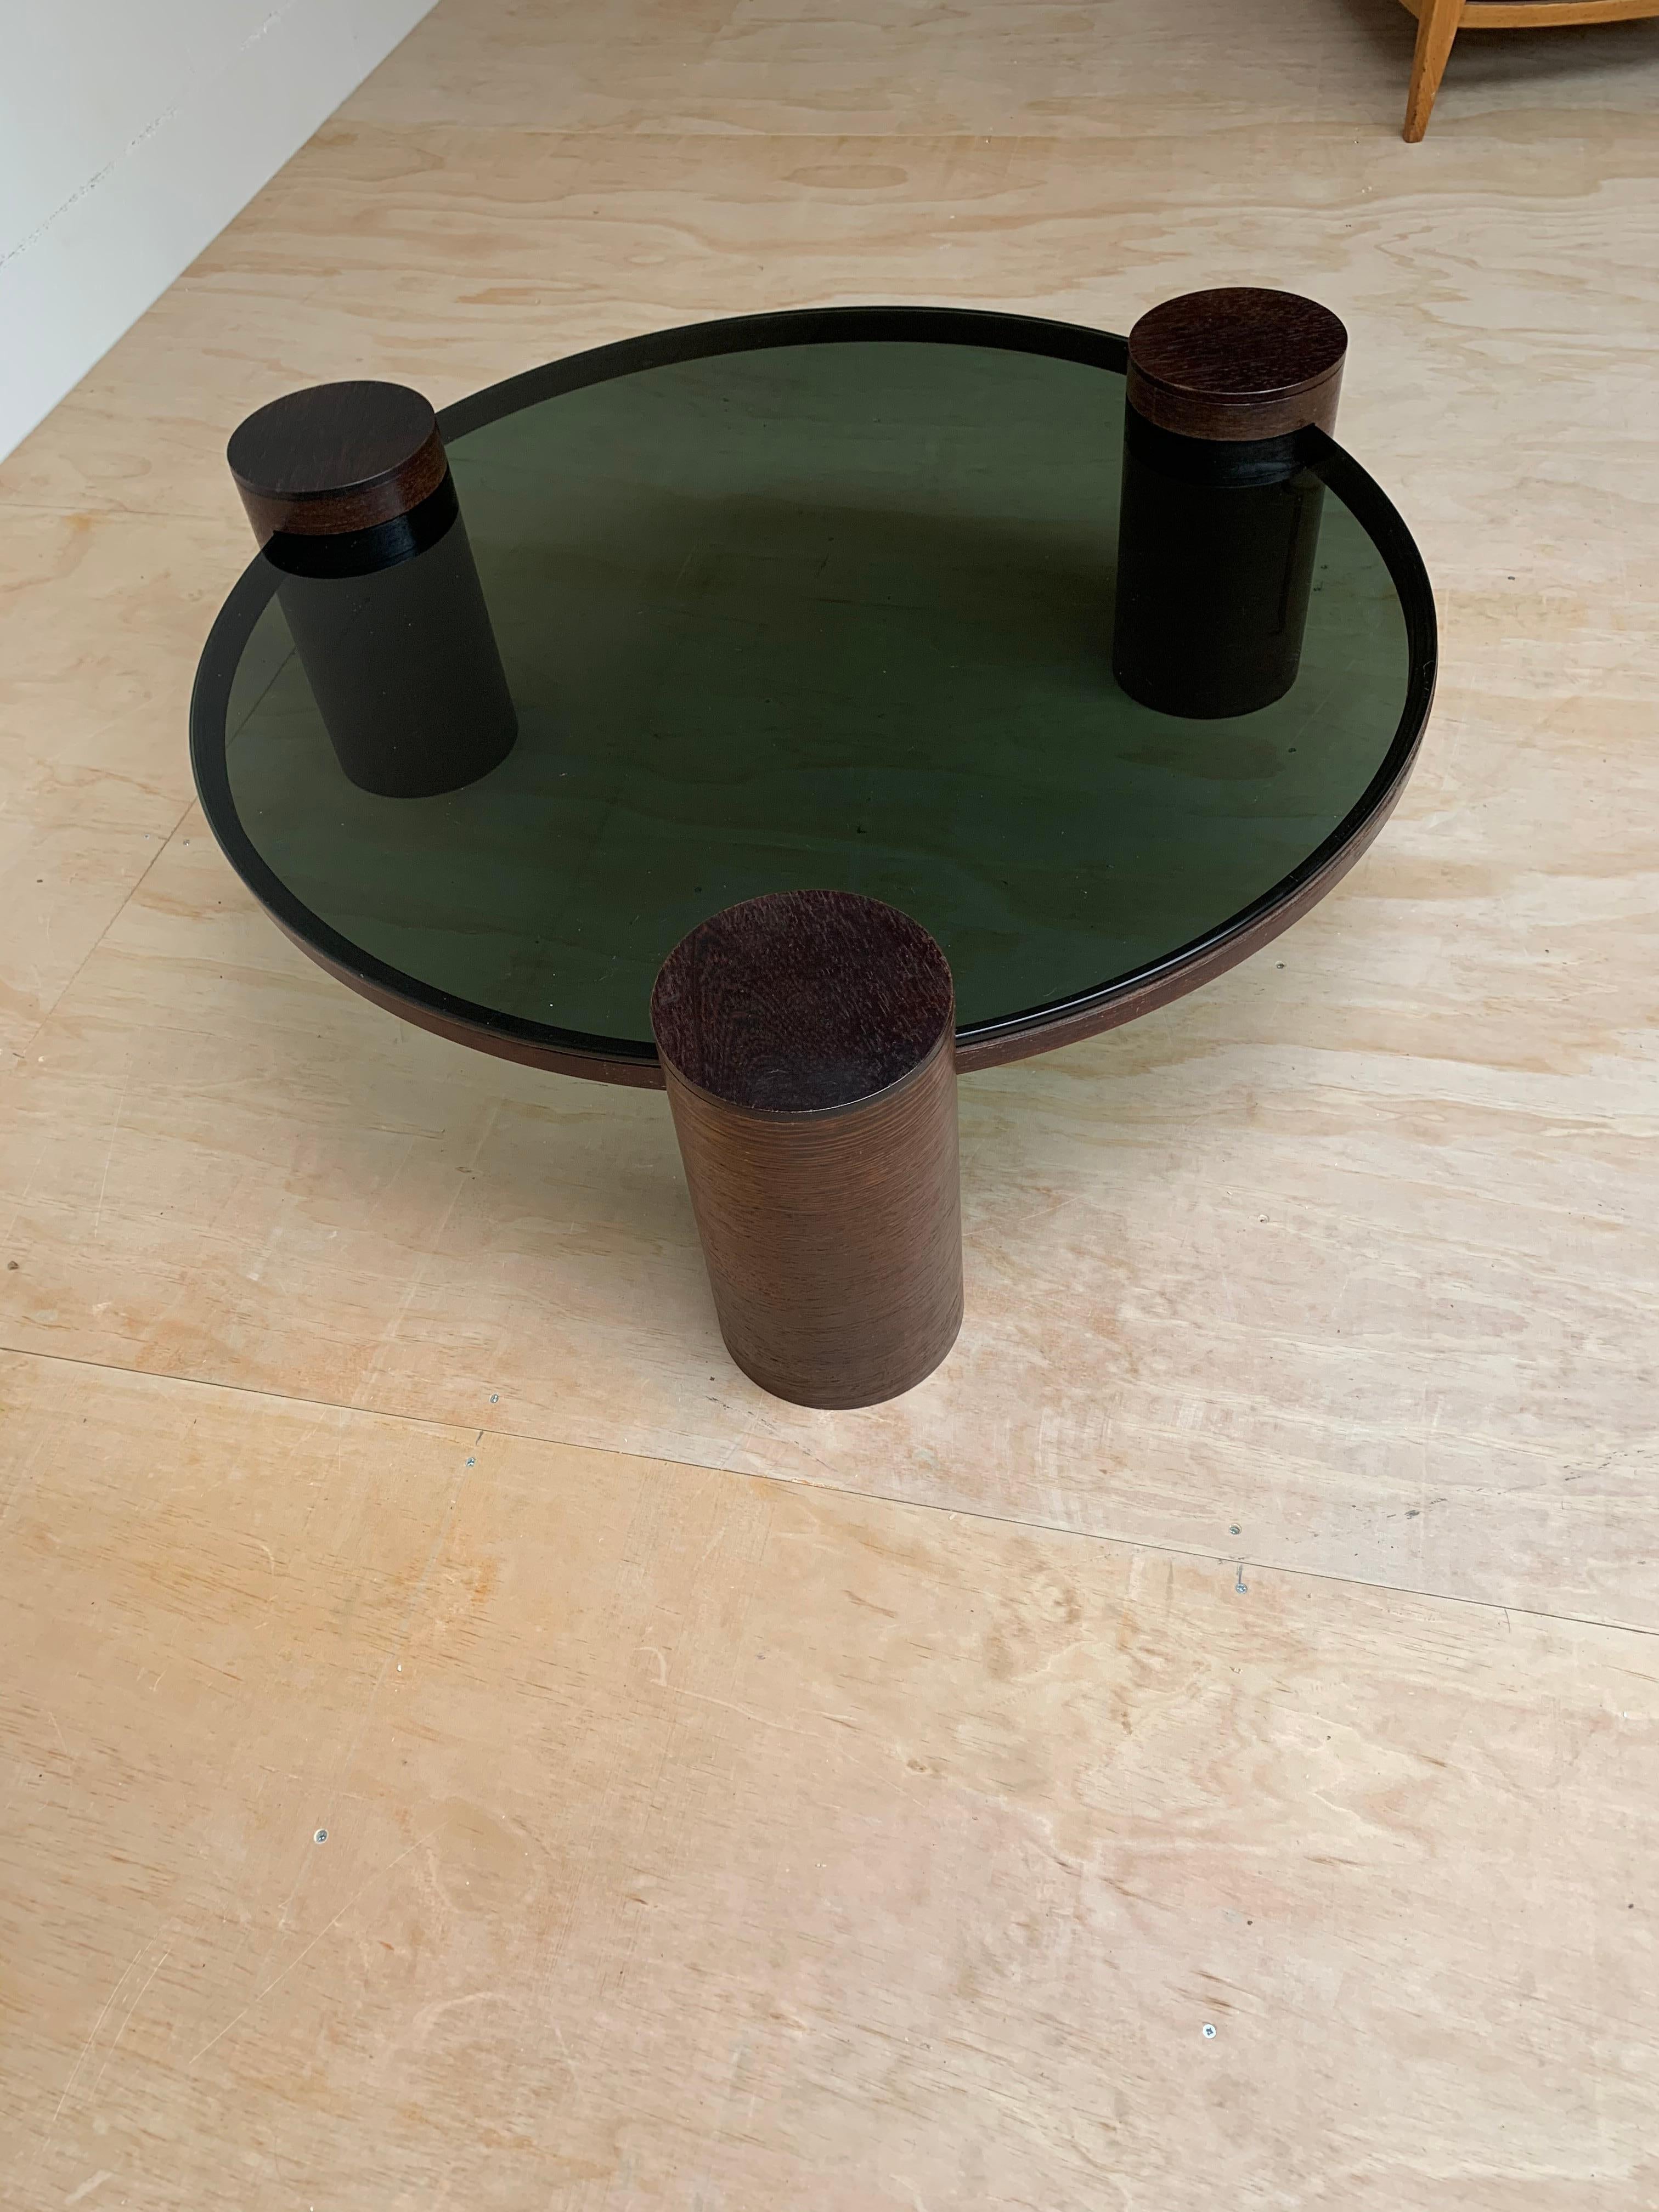 Unique Midcentury Modern Smoked Green Glass Coffee Table w Three Wooden Columns For Sale 7